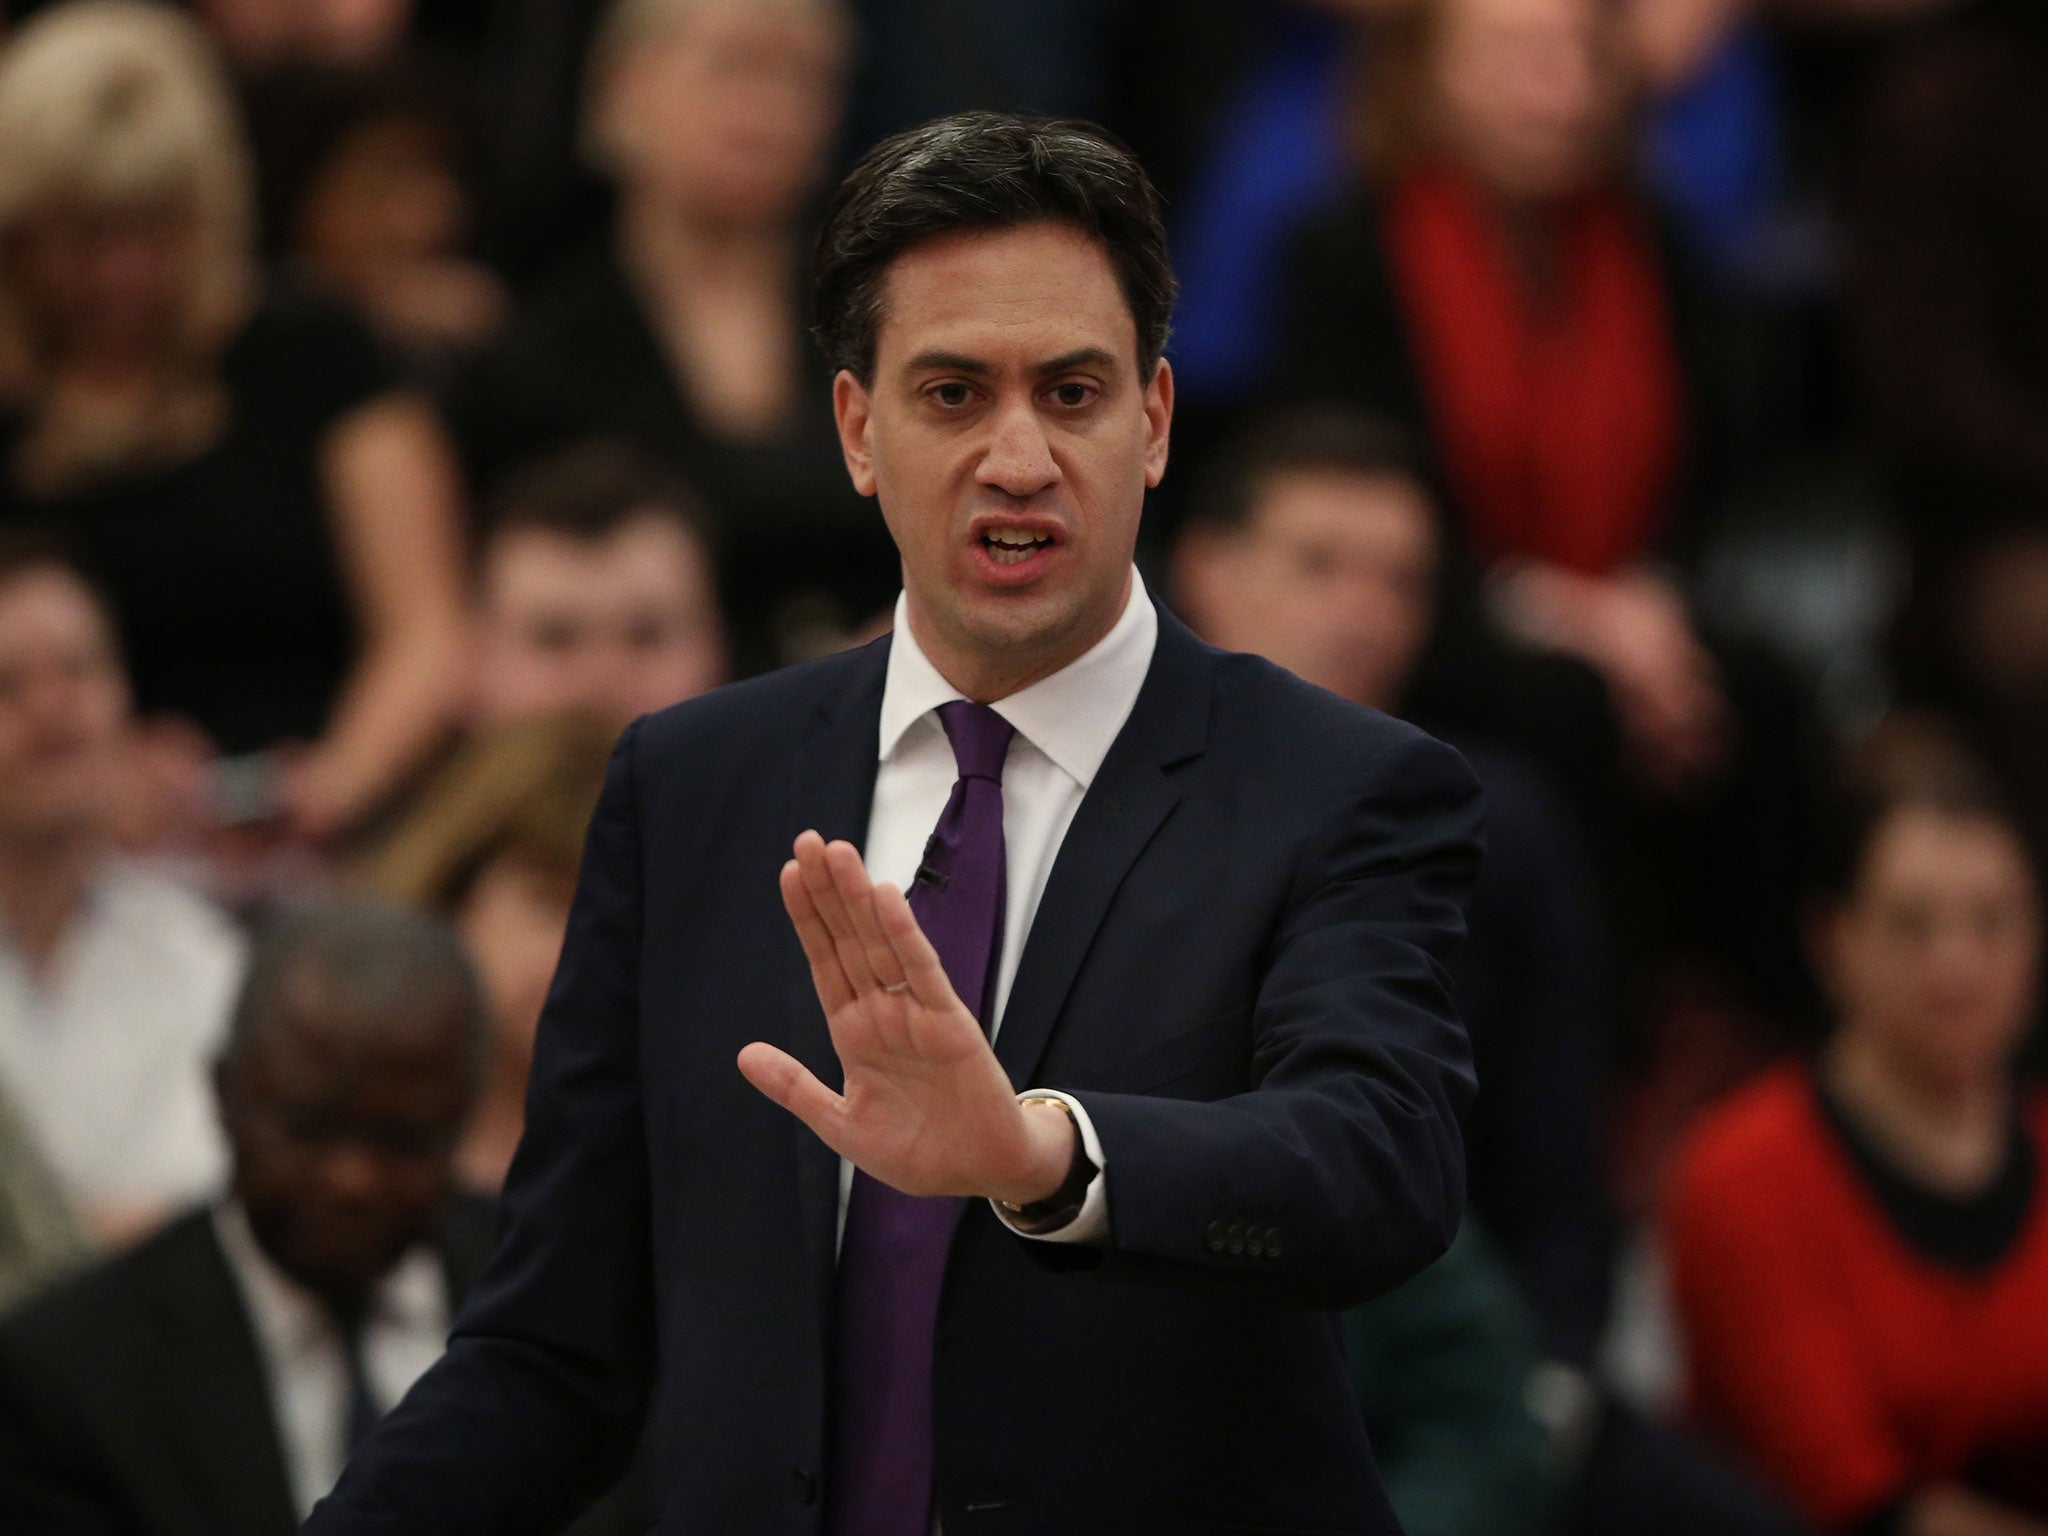 Labour MPs said Ed Miliband could have avoided sacking Ms Thornberry